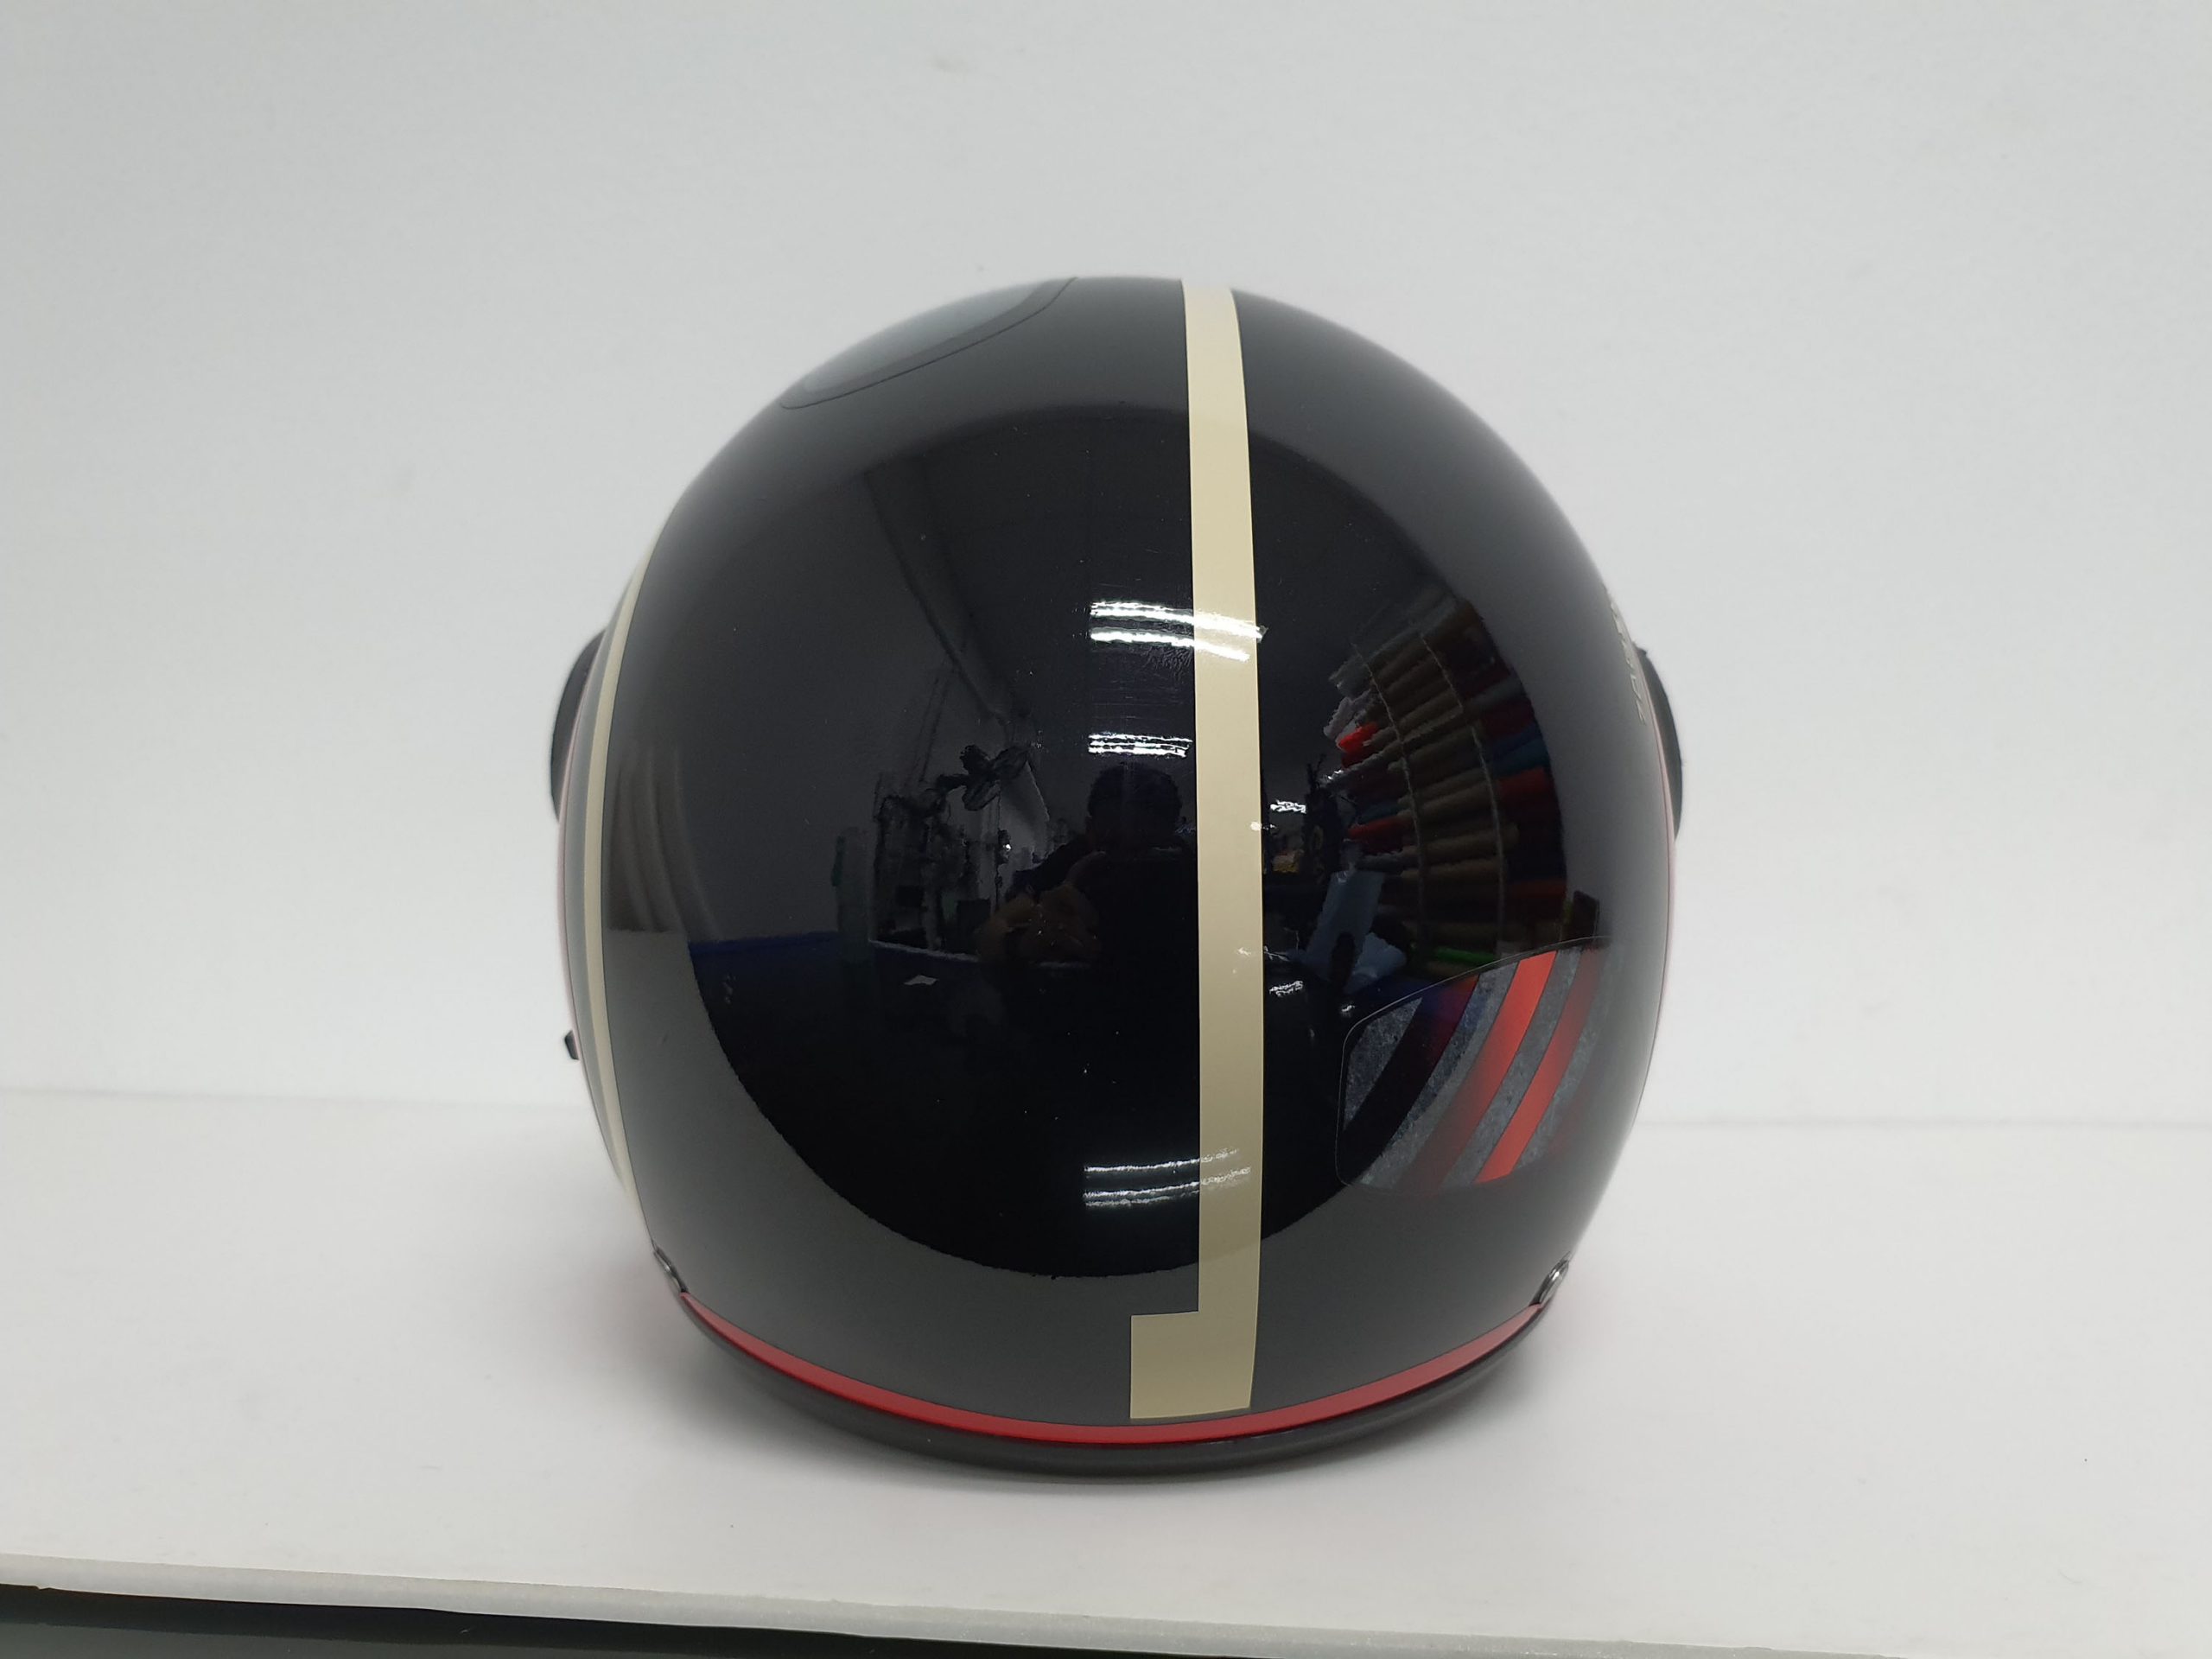 A Seamless gold striped following the curve at the back of the Helmet